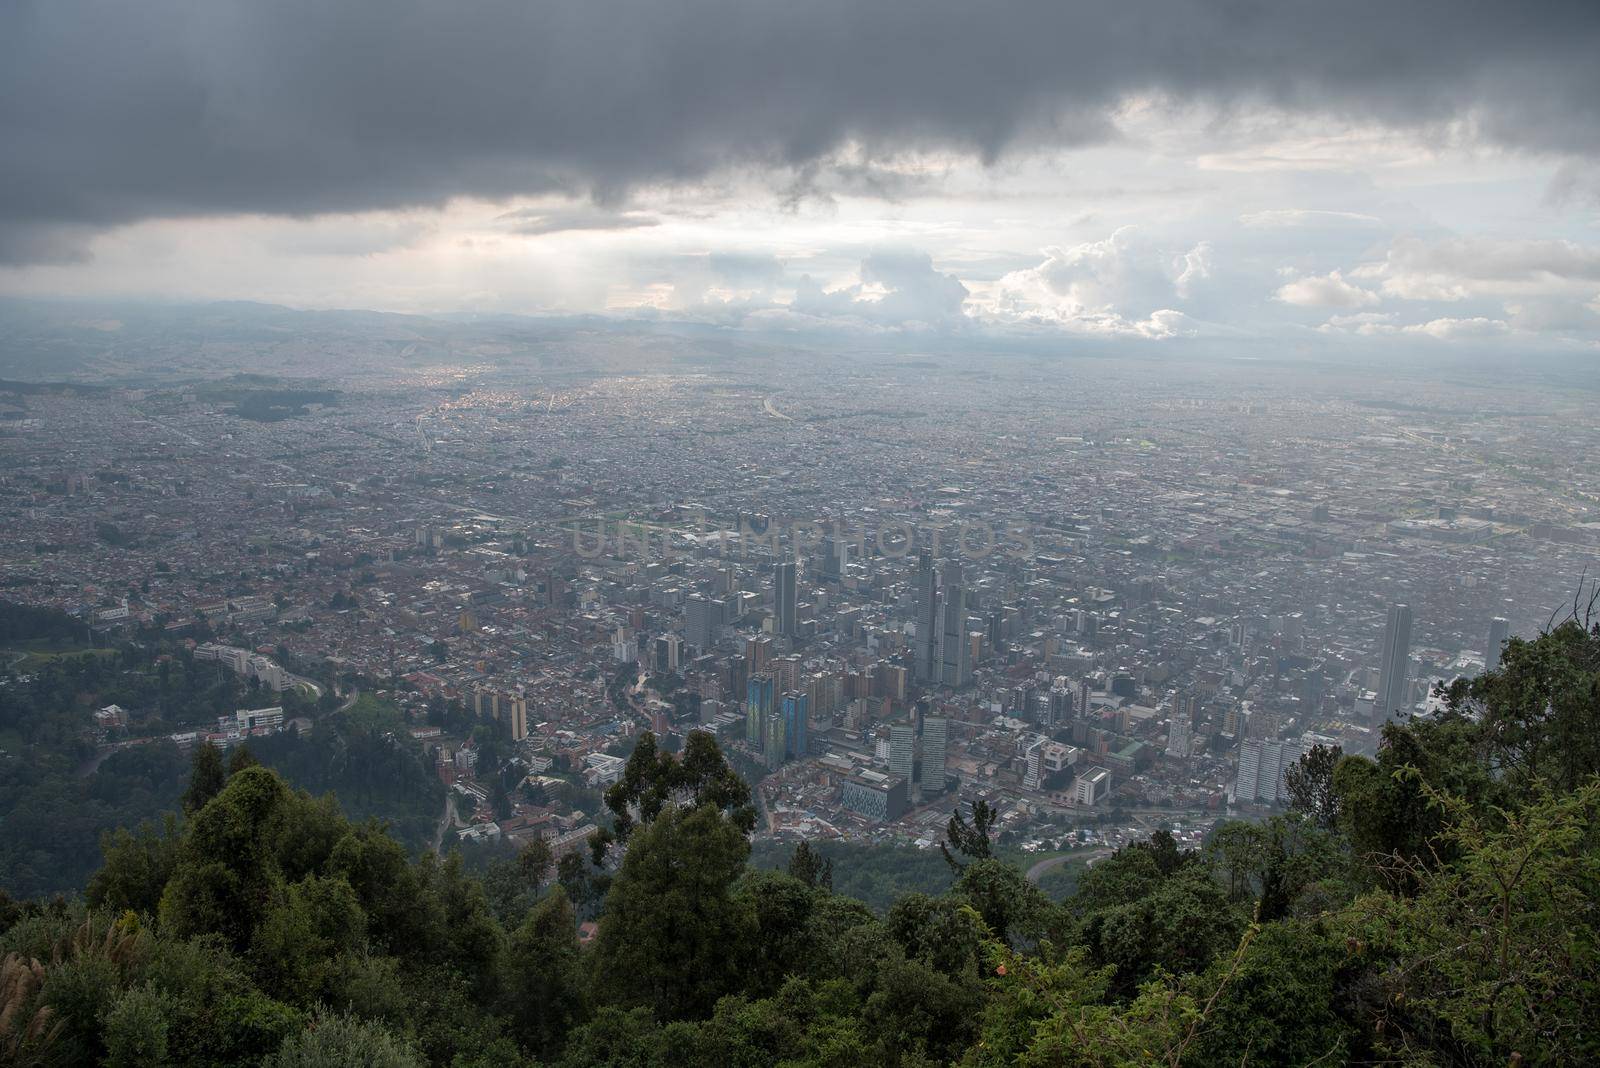 View from the top of Mount Monserrate in Bogota, Colombia. Storm clouds and skyline.